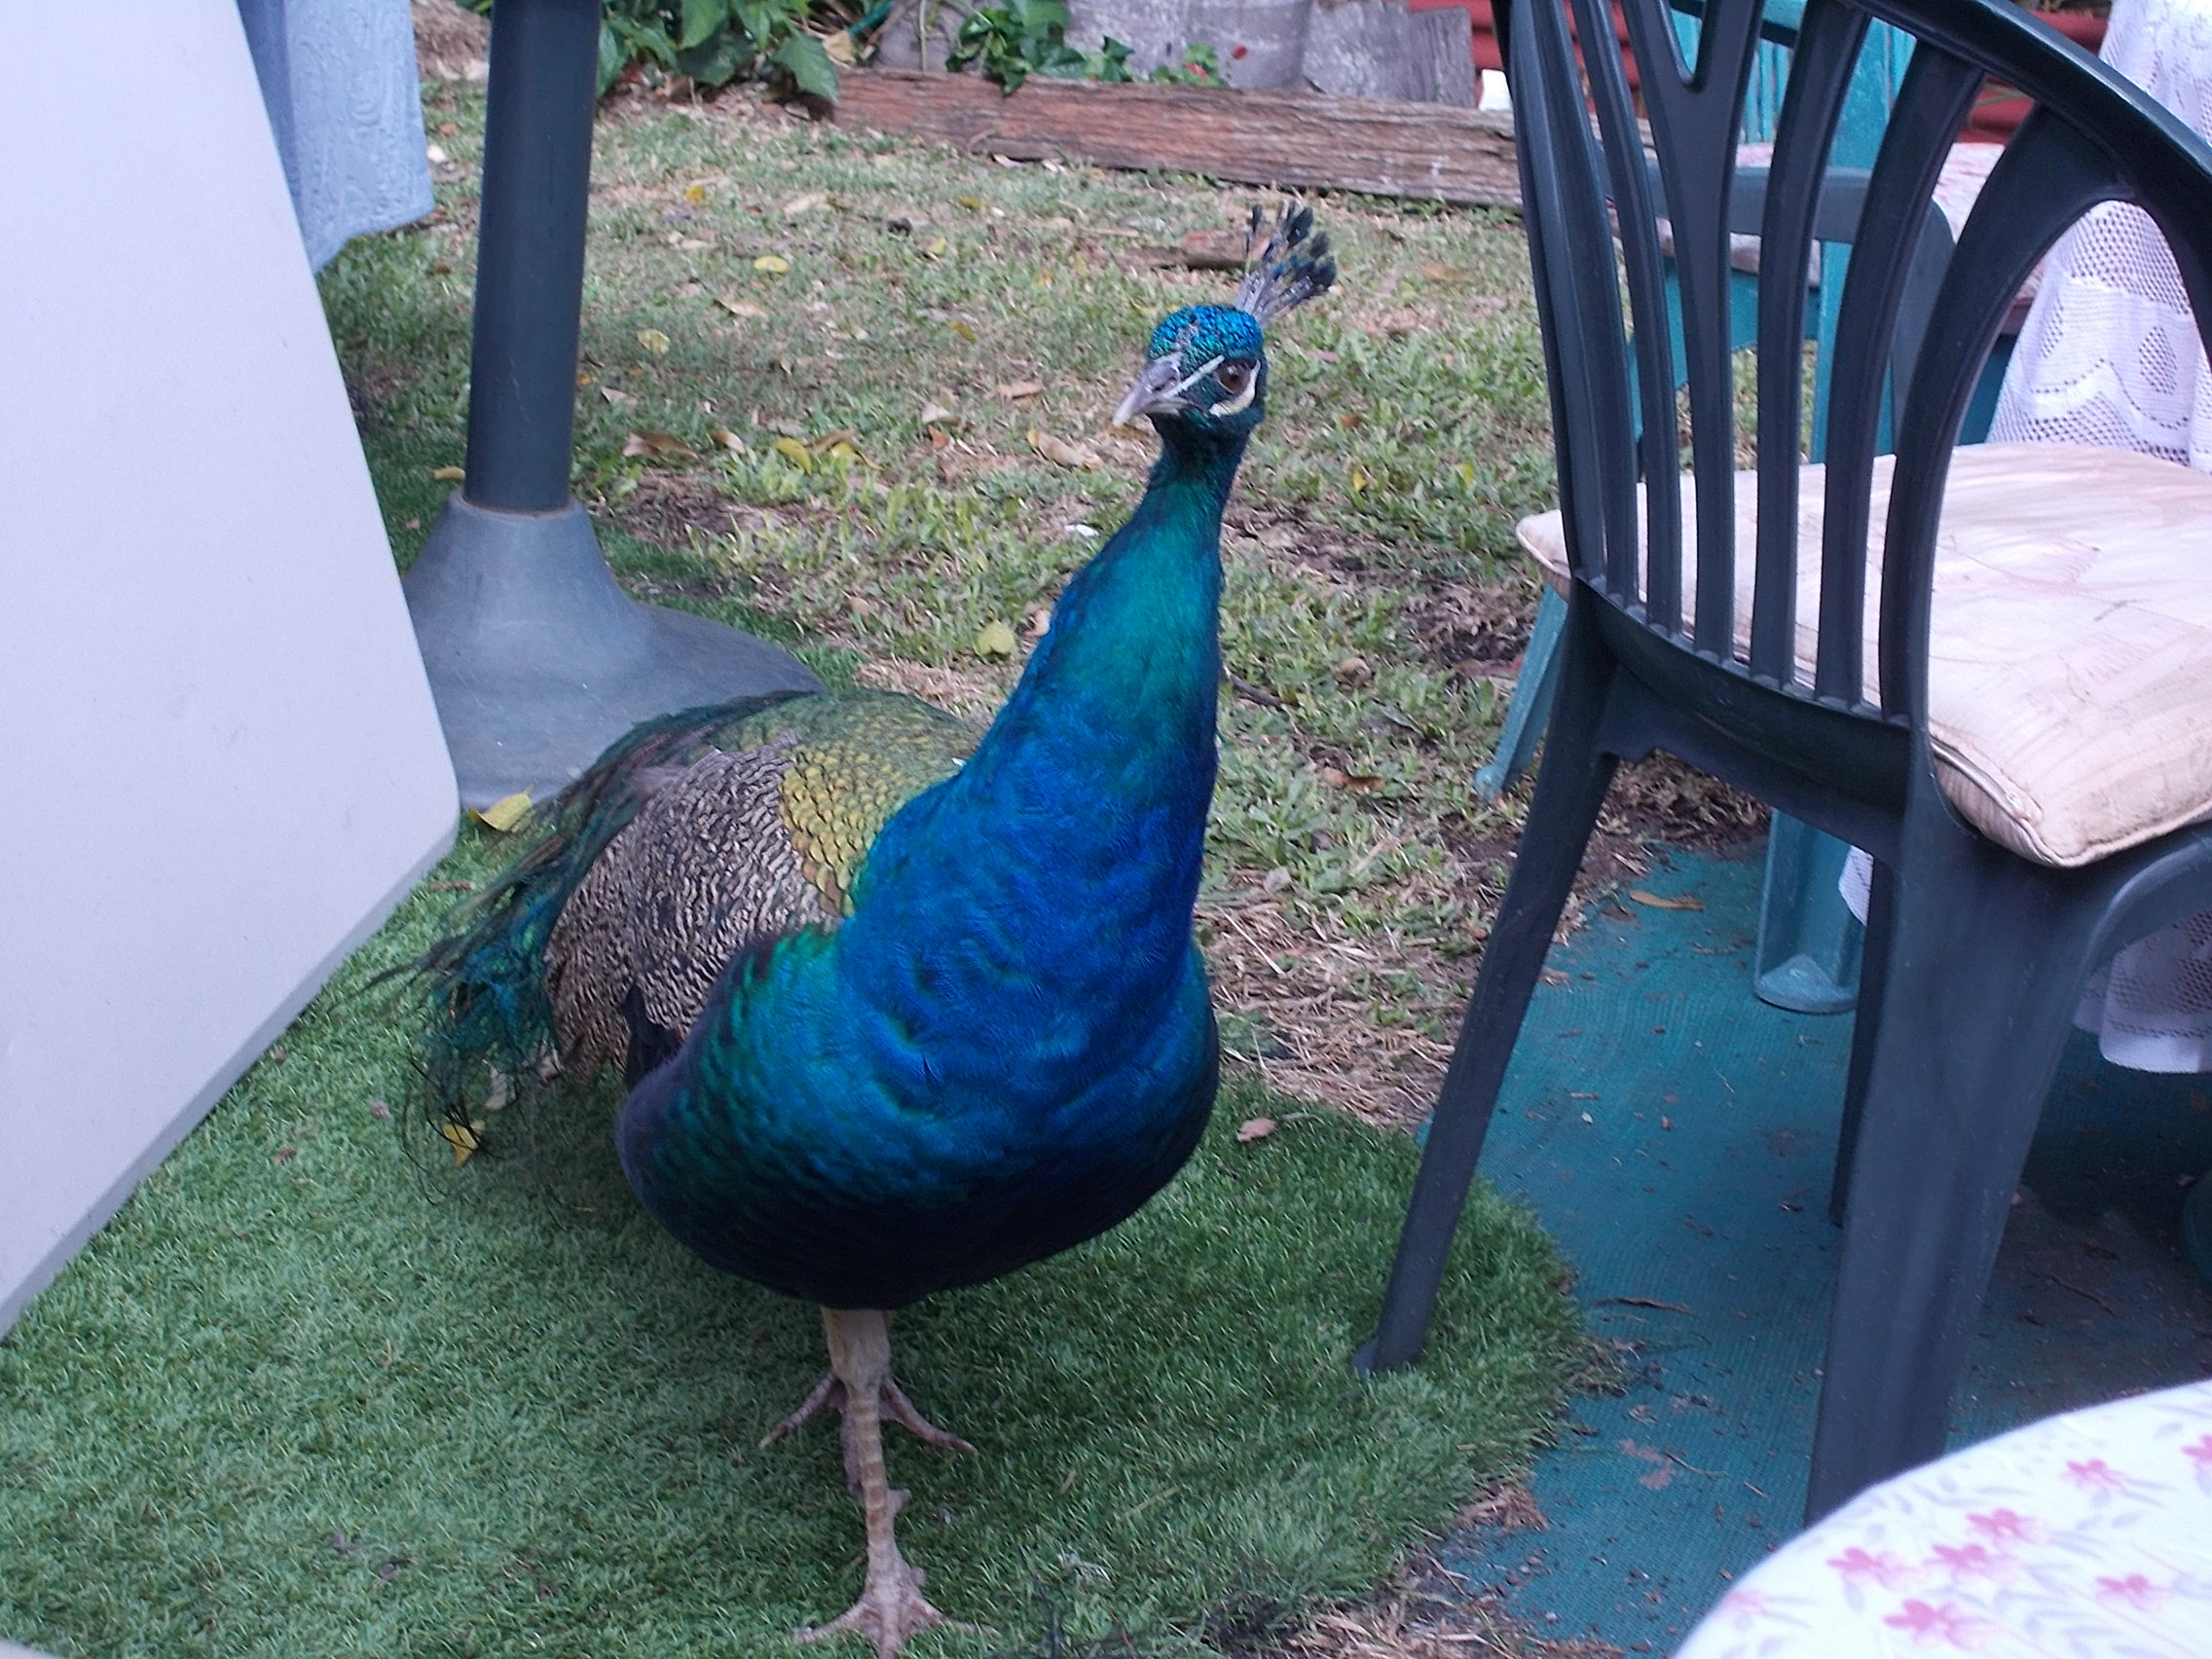 Friendly wild Peacock hanging around the tables at Morning tea.